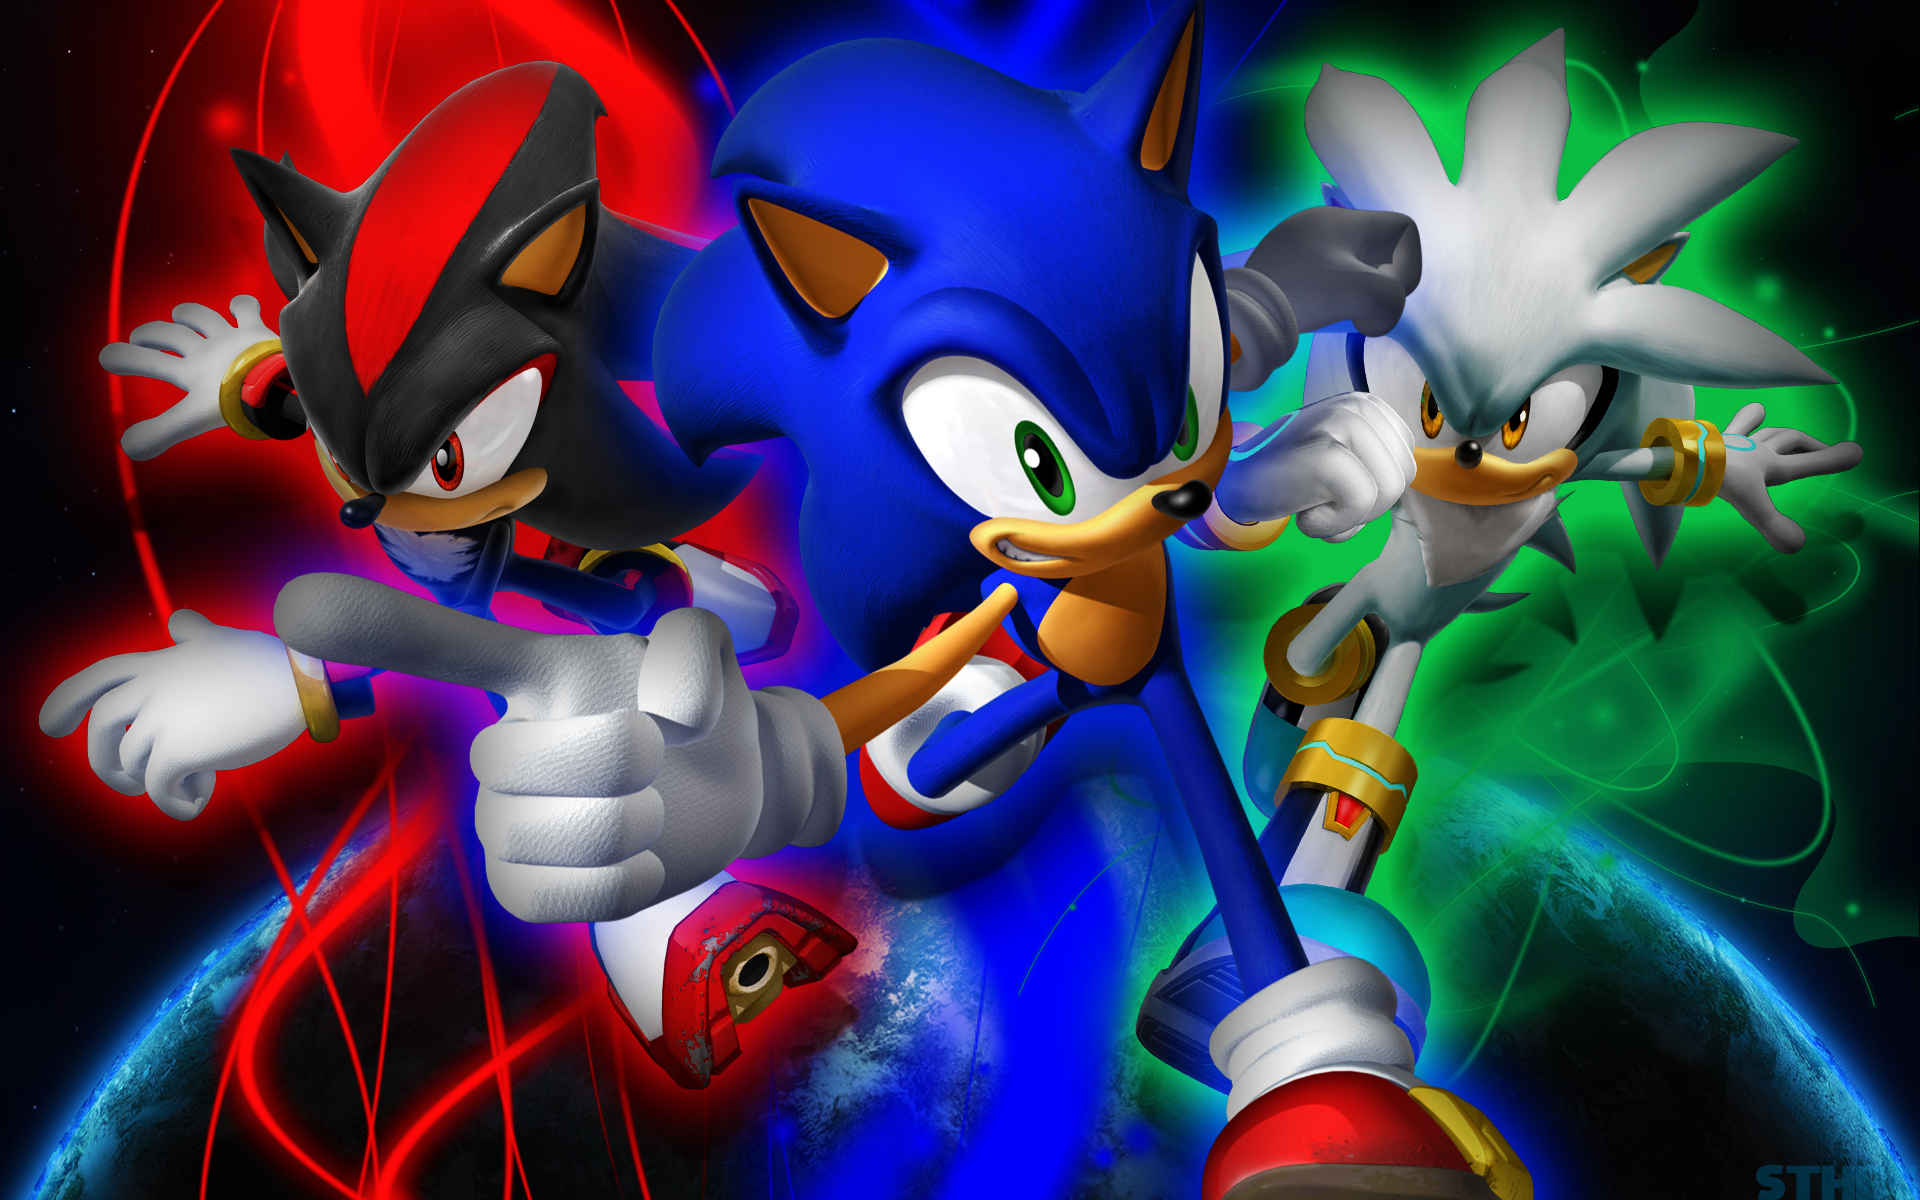 Shadow the Hedgehog Image Download Free. 